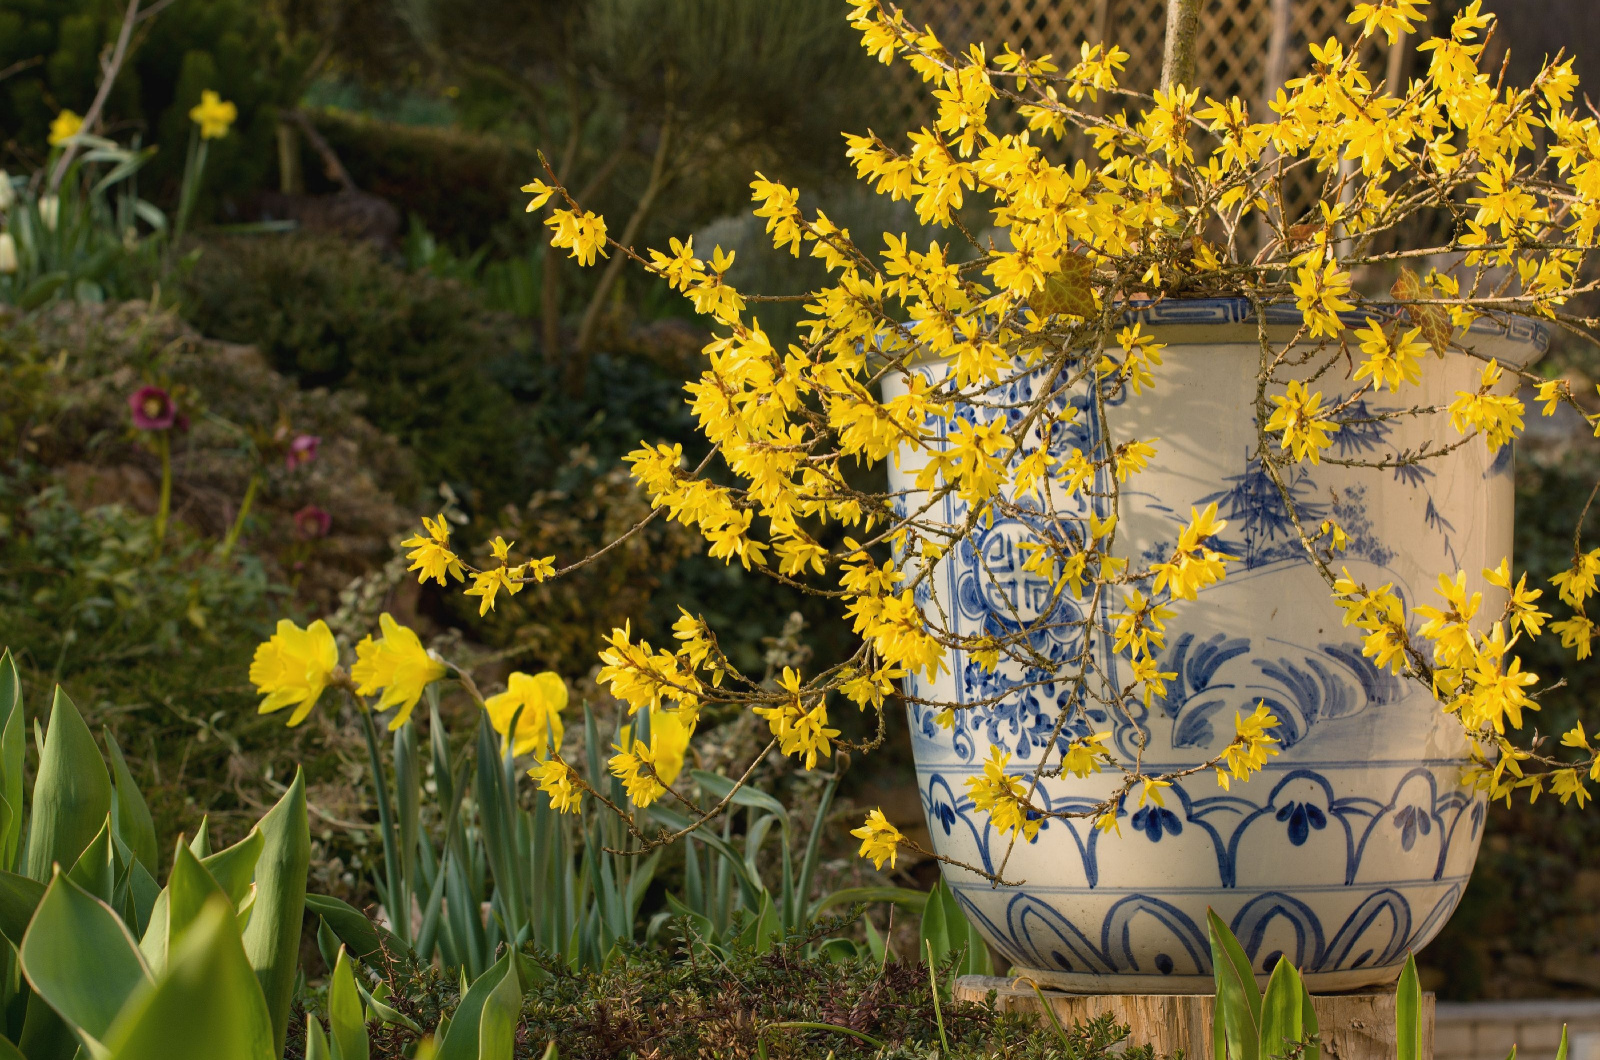 forsythia growing in a pot